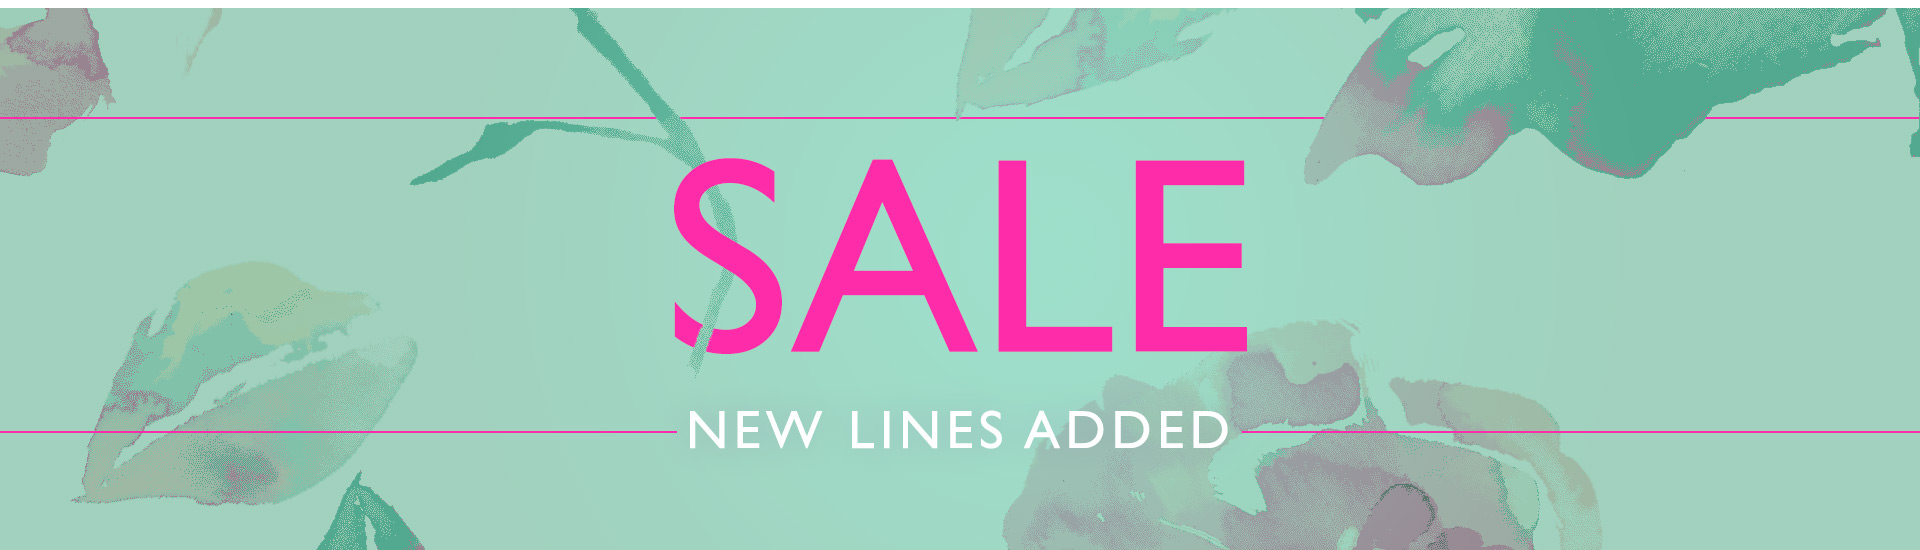 Apricot: Sale up to 50% off selected lines from dresses and tops, to trousers and skirts and more